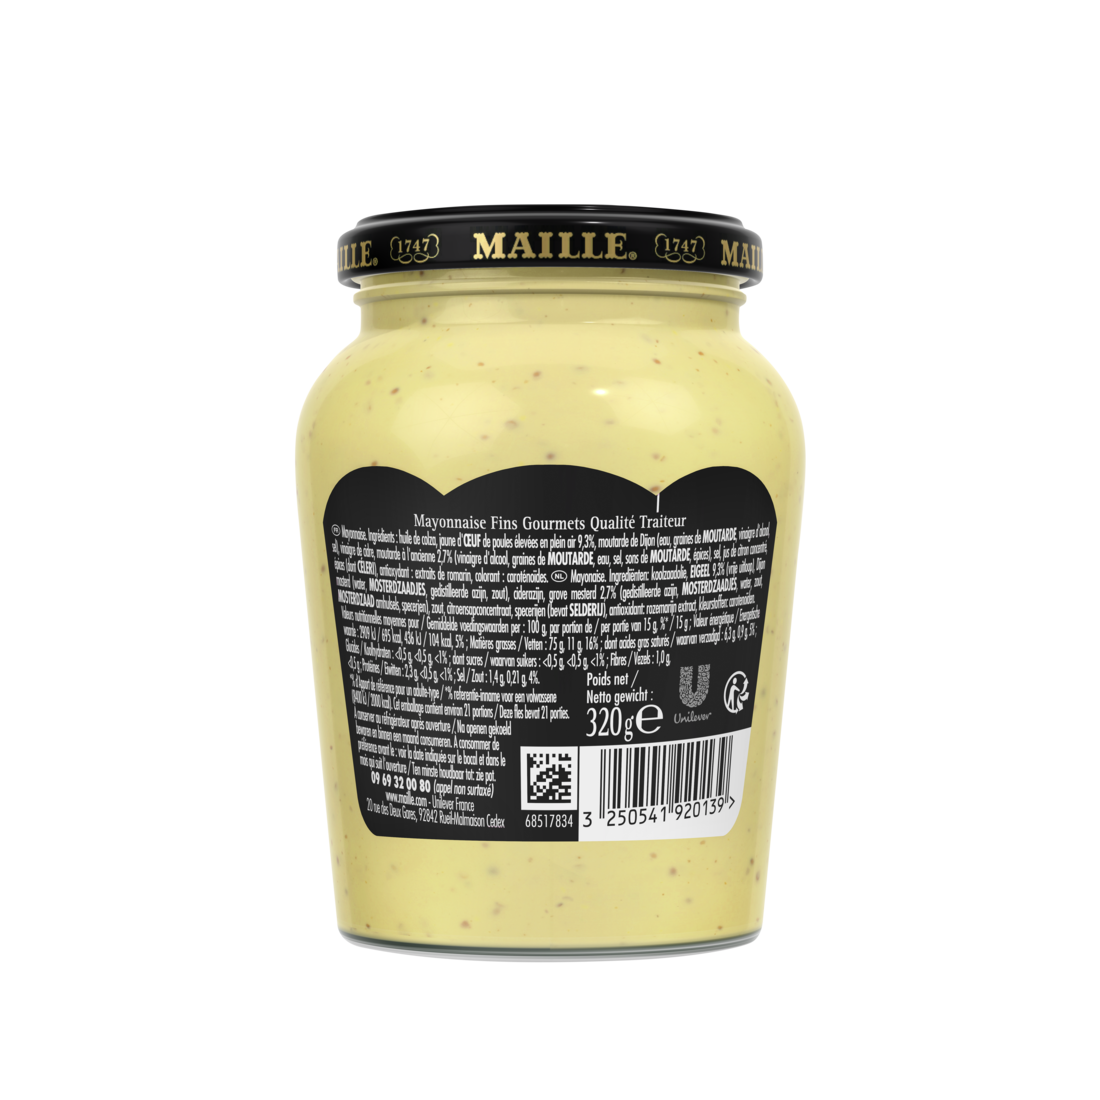 Maille - Mayonnaise Fins Gourmets Bocal 320 g, backend